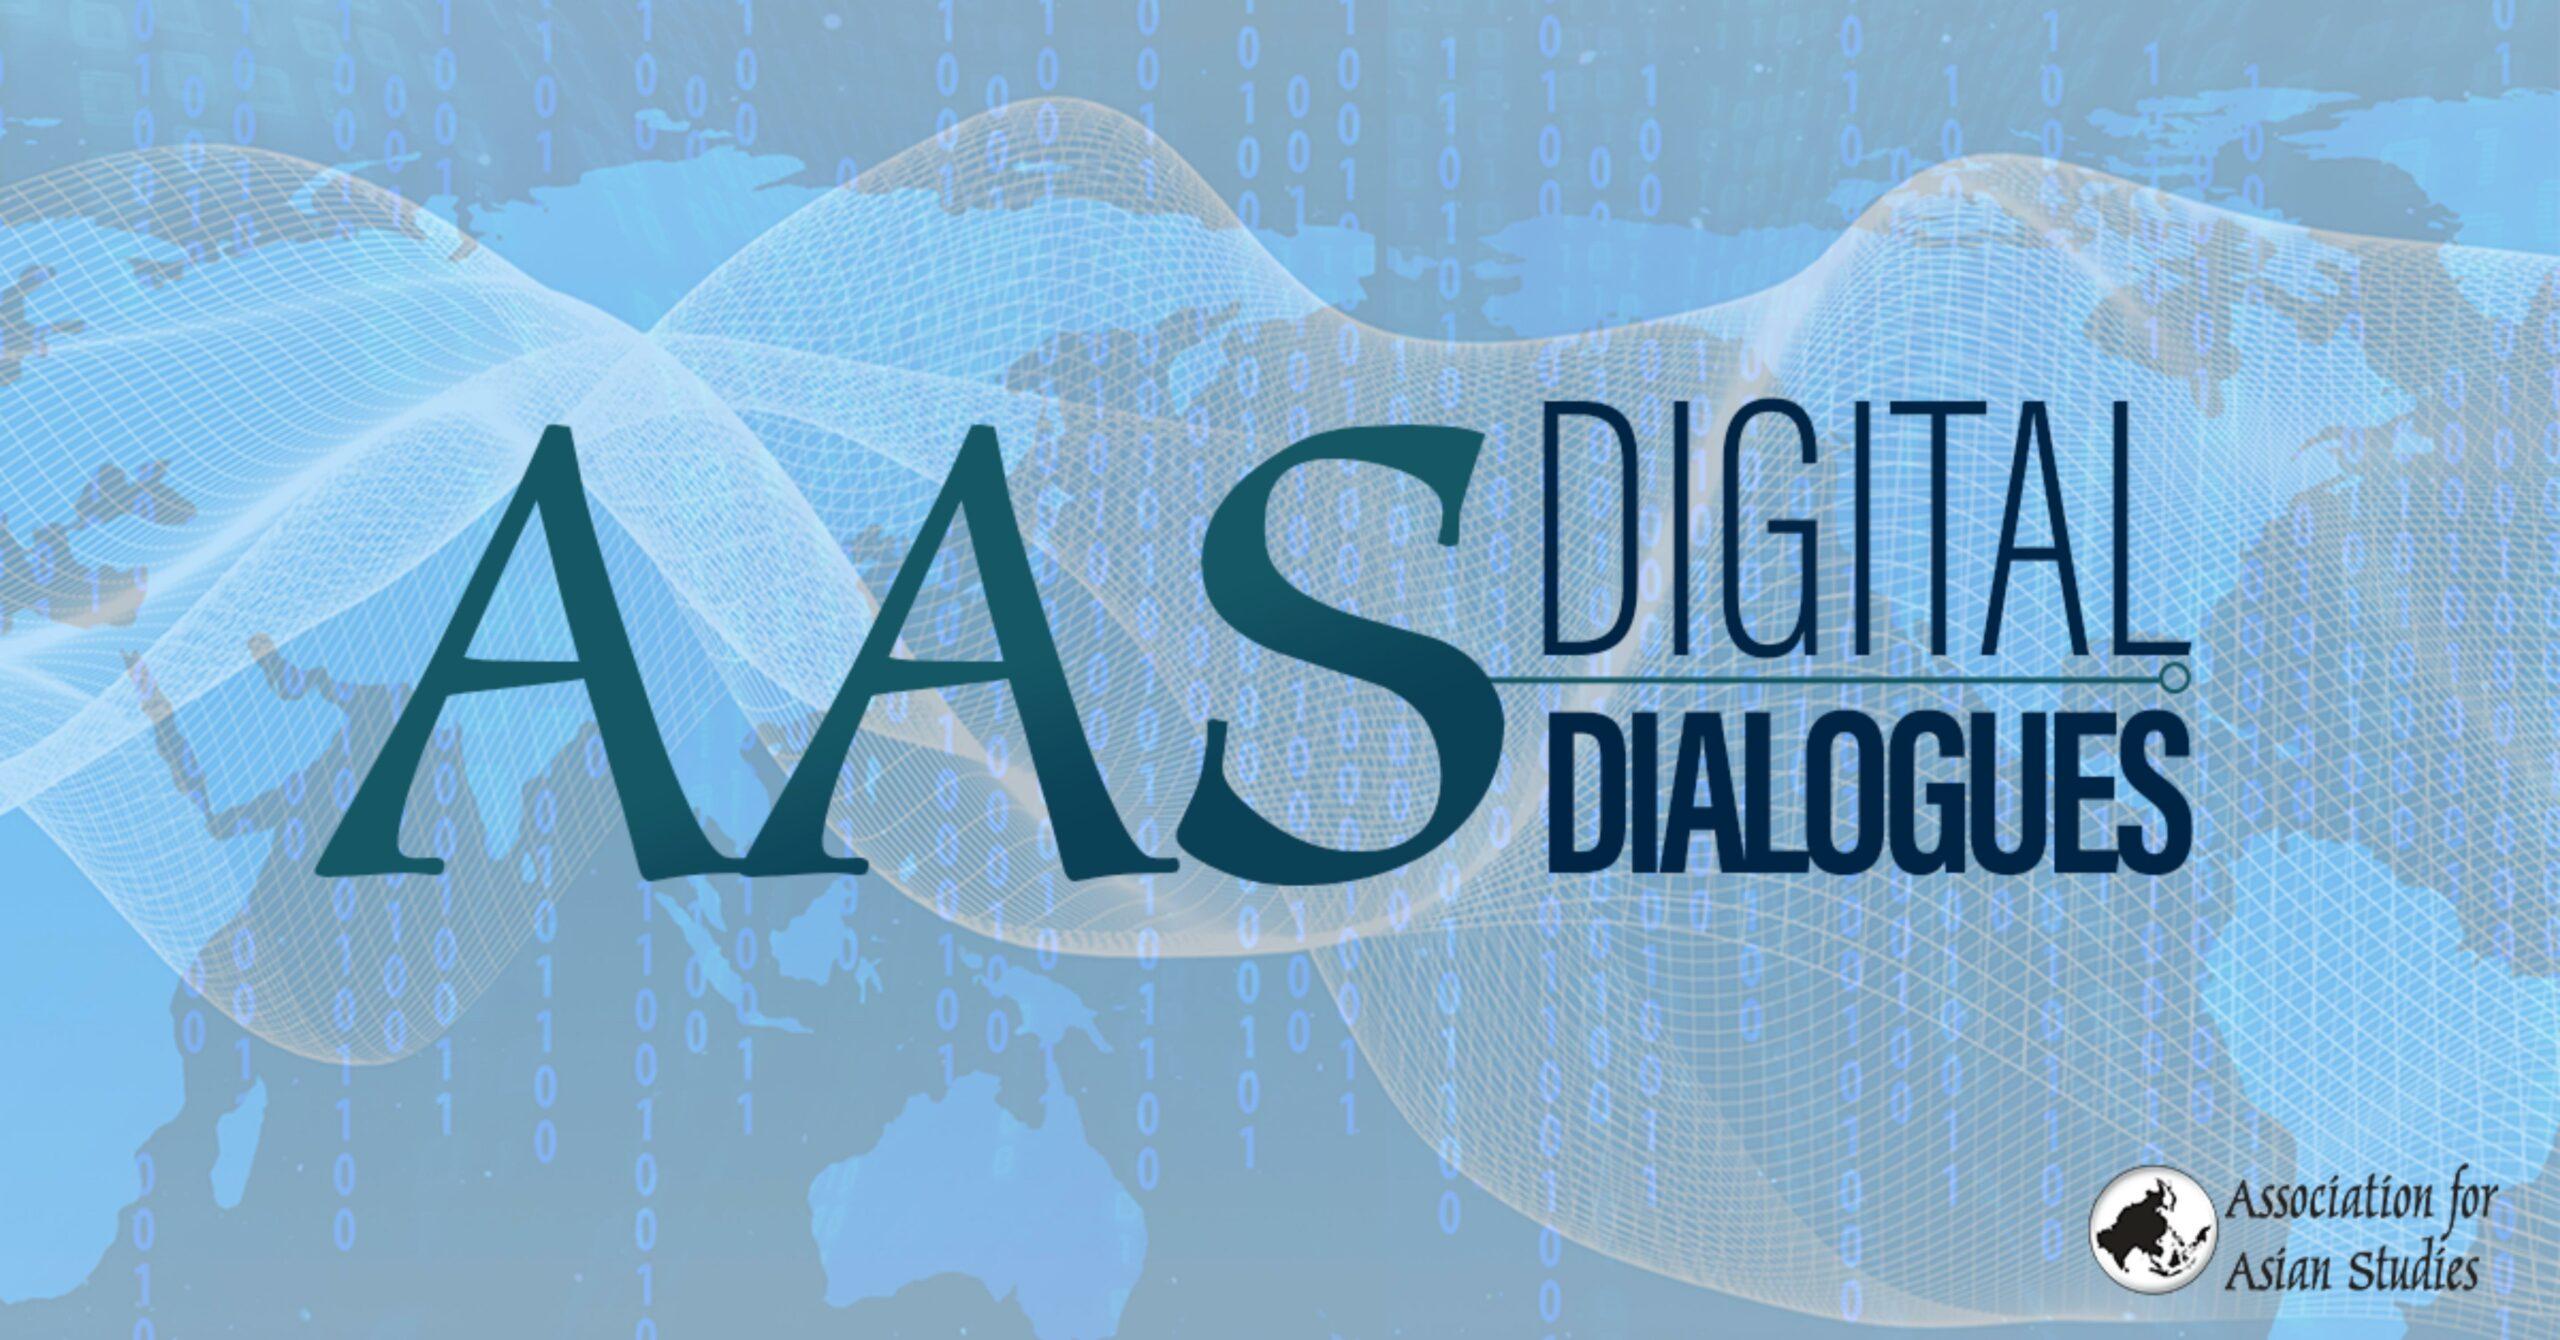 From Dissertation to Book: An AAS Digital Dialogues Series